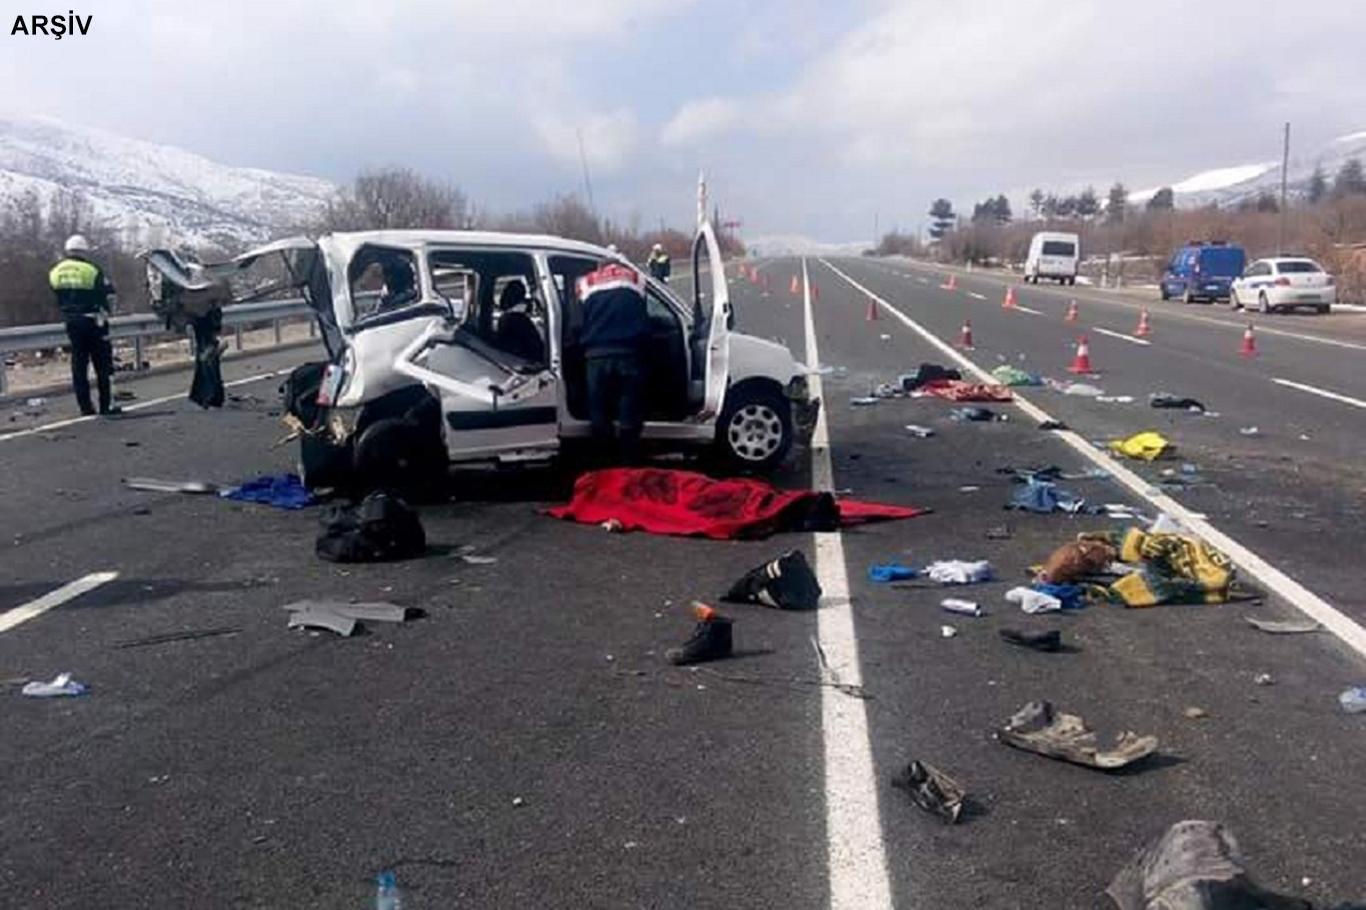 174,896 traffic accidents involving death or injury occurred in Turkey during 2019